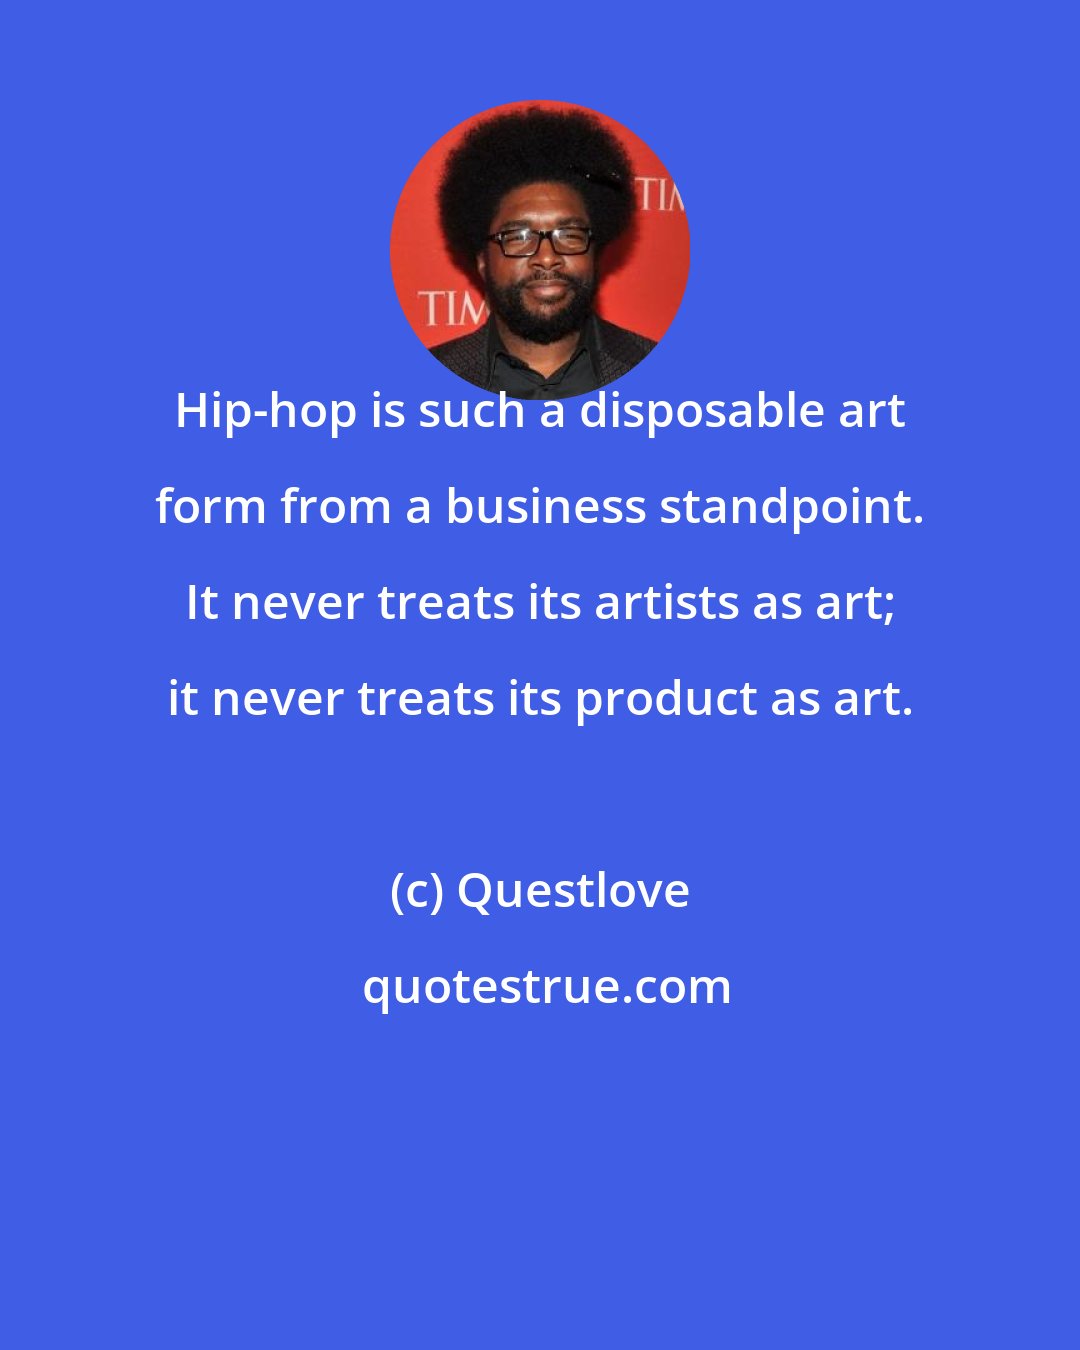 Questlove: Hip-hop is such a disposable art form from a business standpoint. It never treats its artists as art; it never treats its product as art.